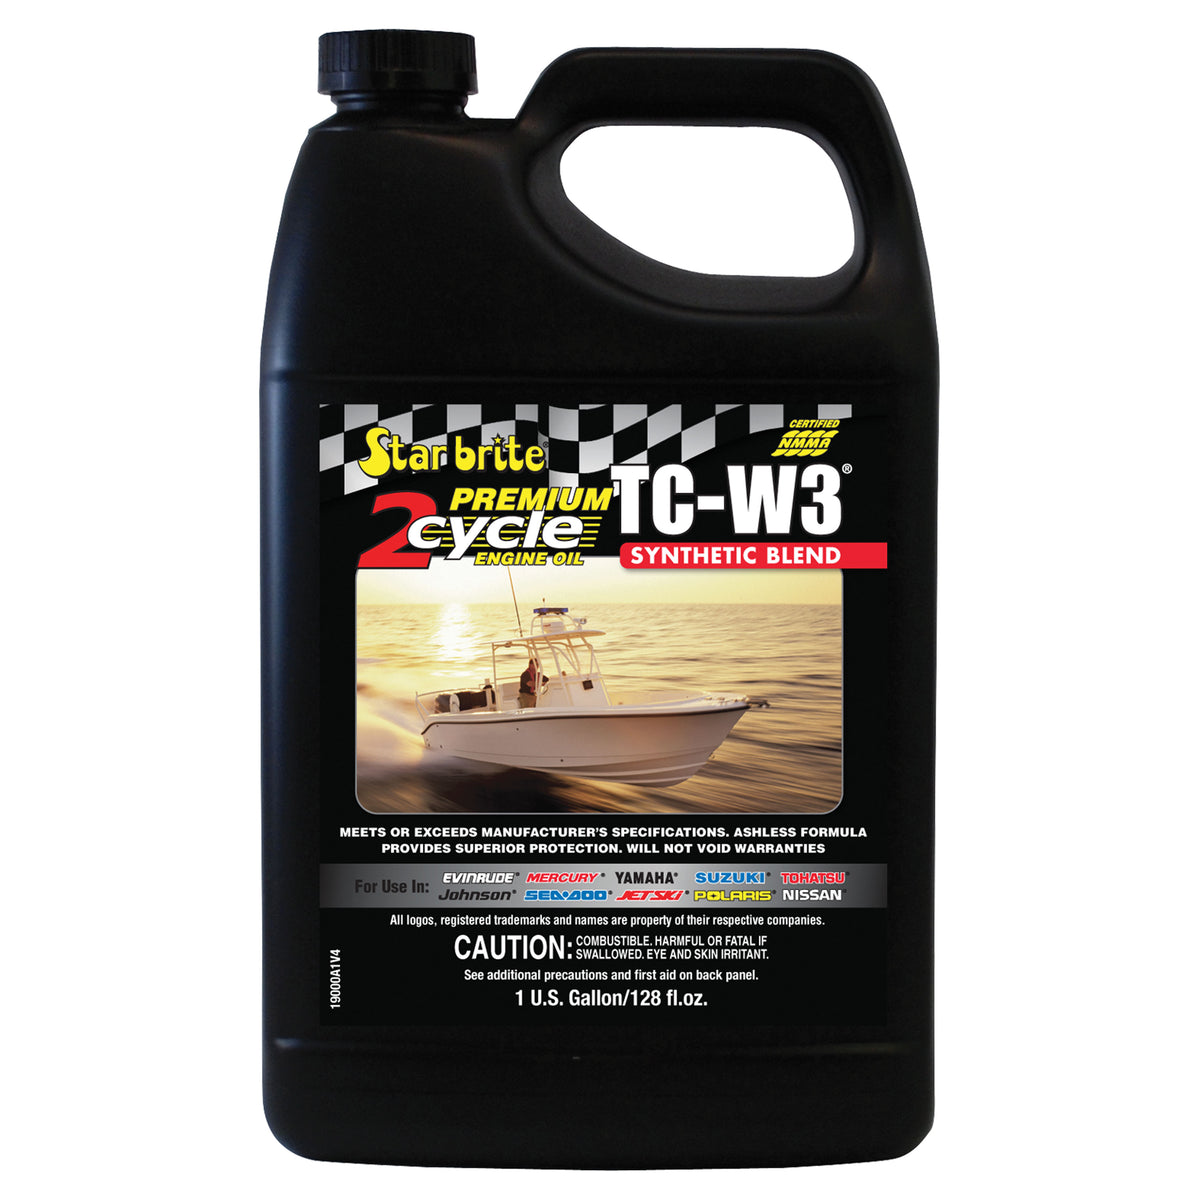 Star brite 19000 Premium 2-Cycle TC-W3 Synthetic Blend Engine Oil - Gallon